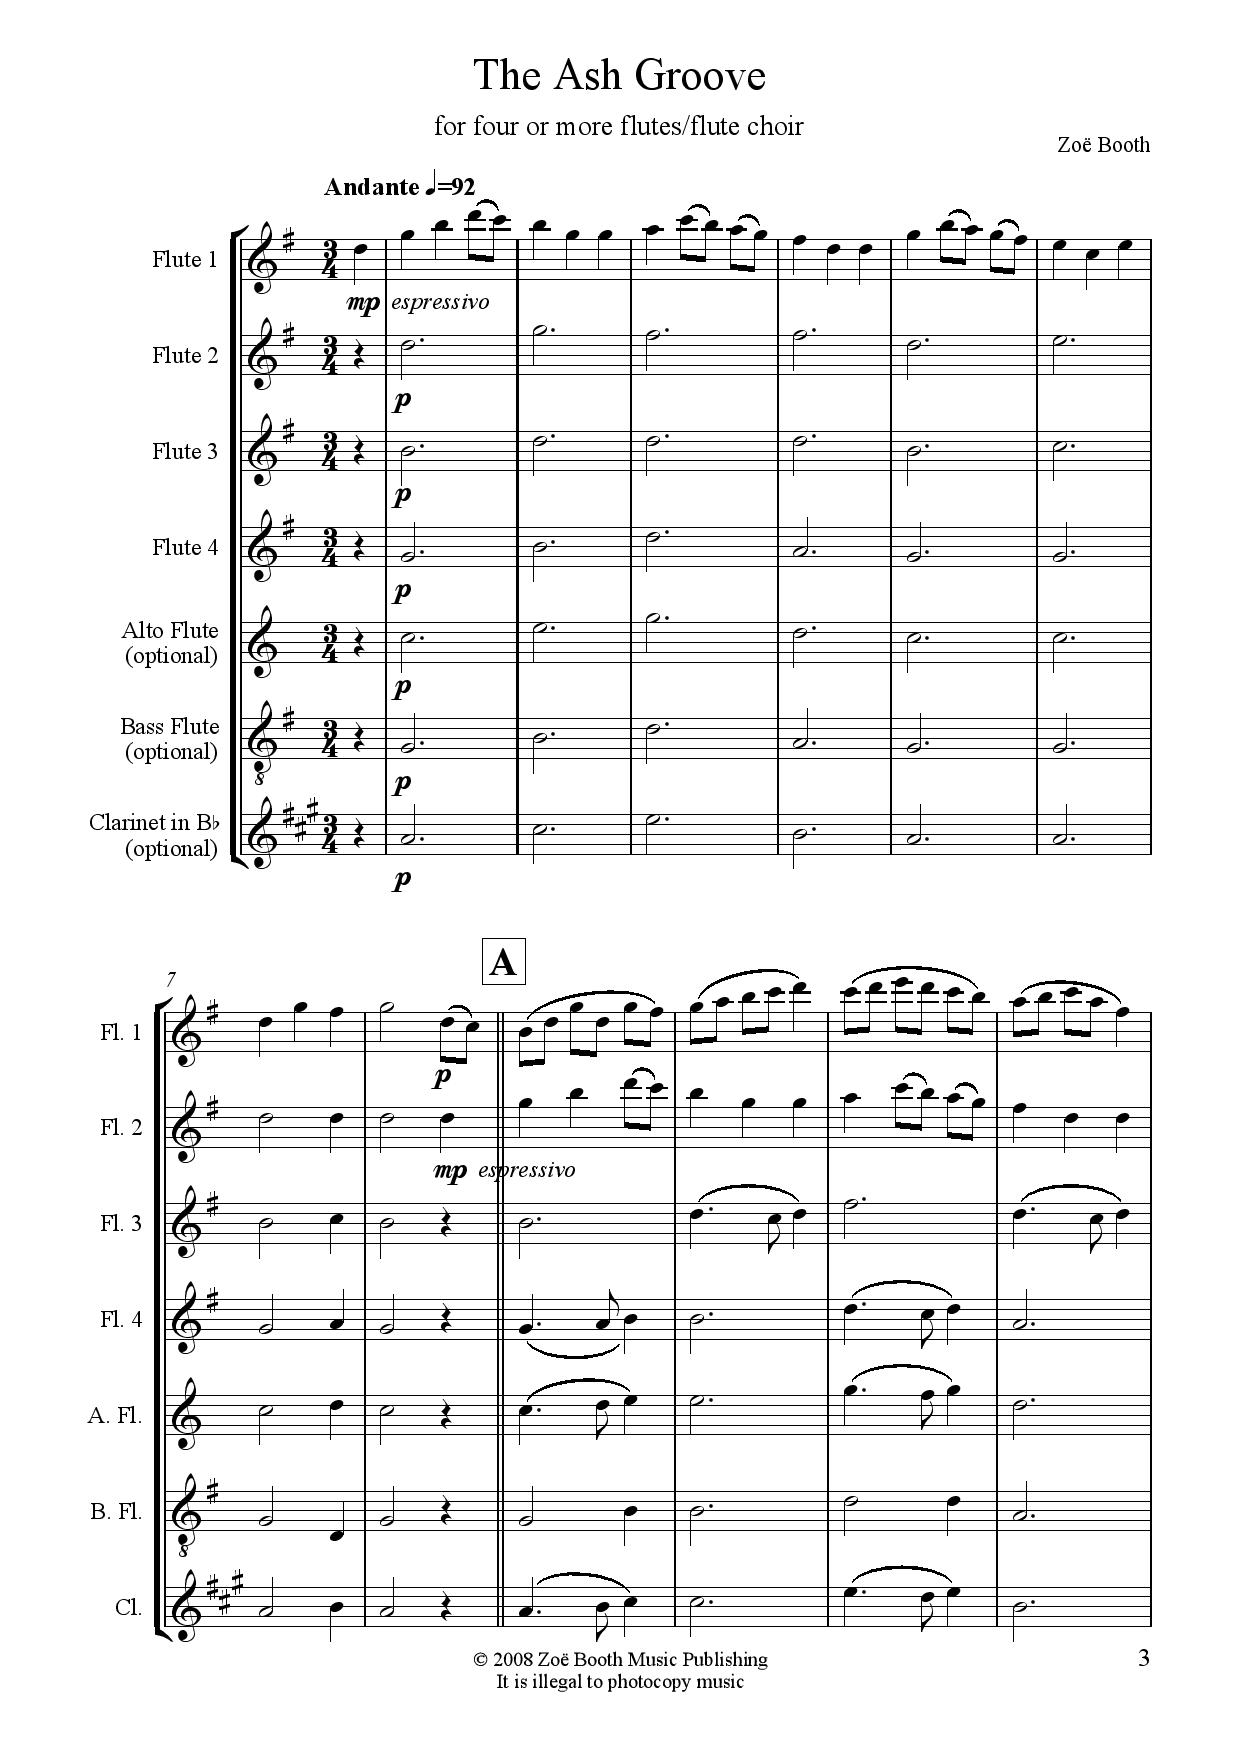 The Ash Groove  by Zoë Booth for four or more flutes/flute choir